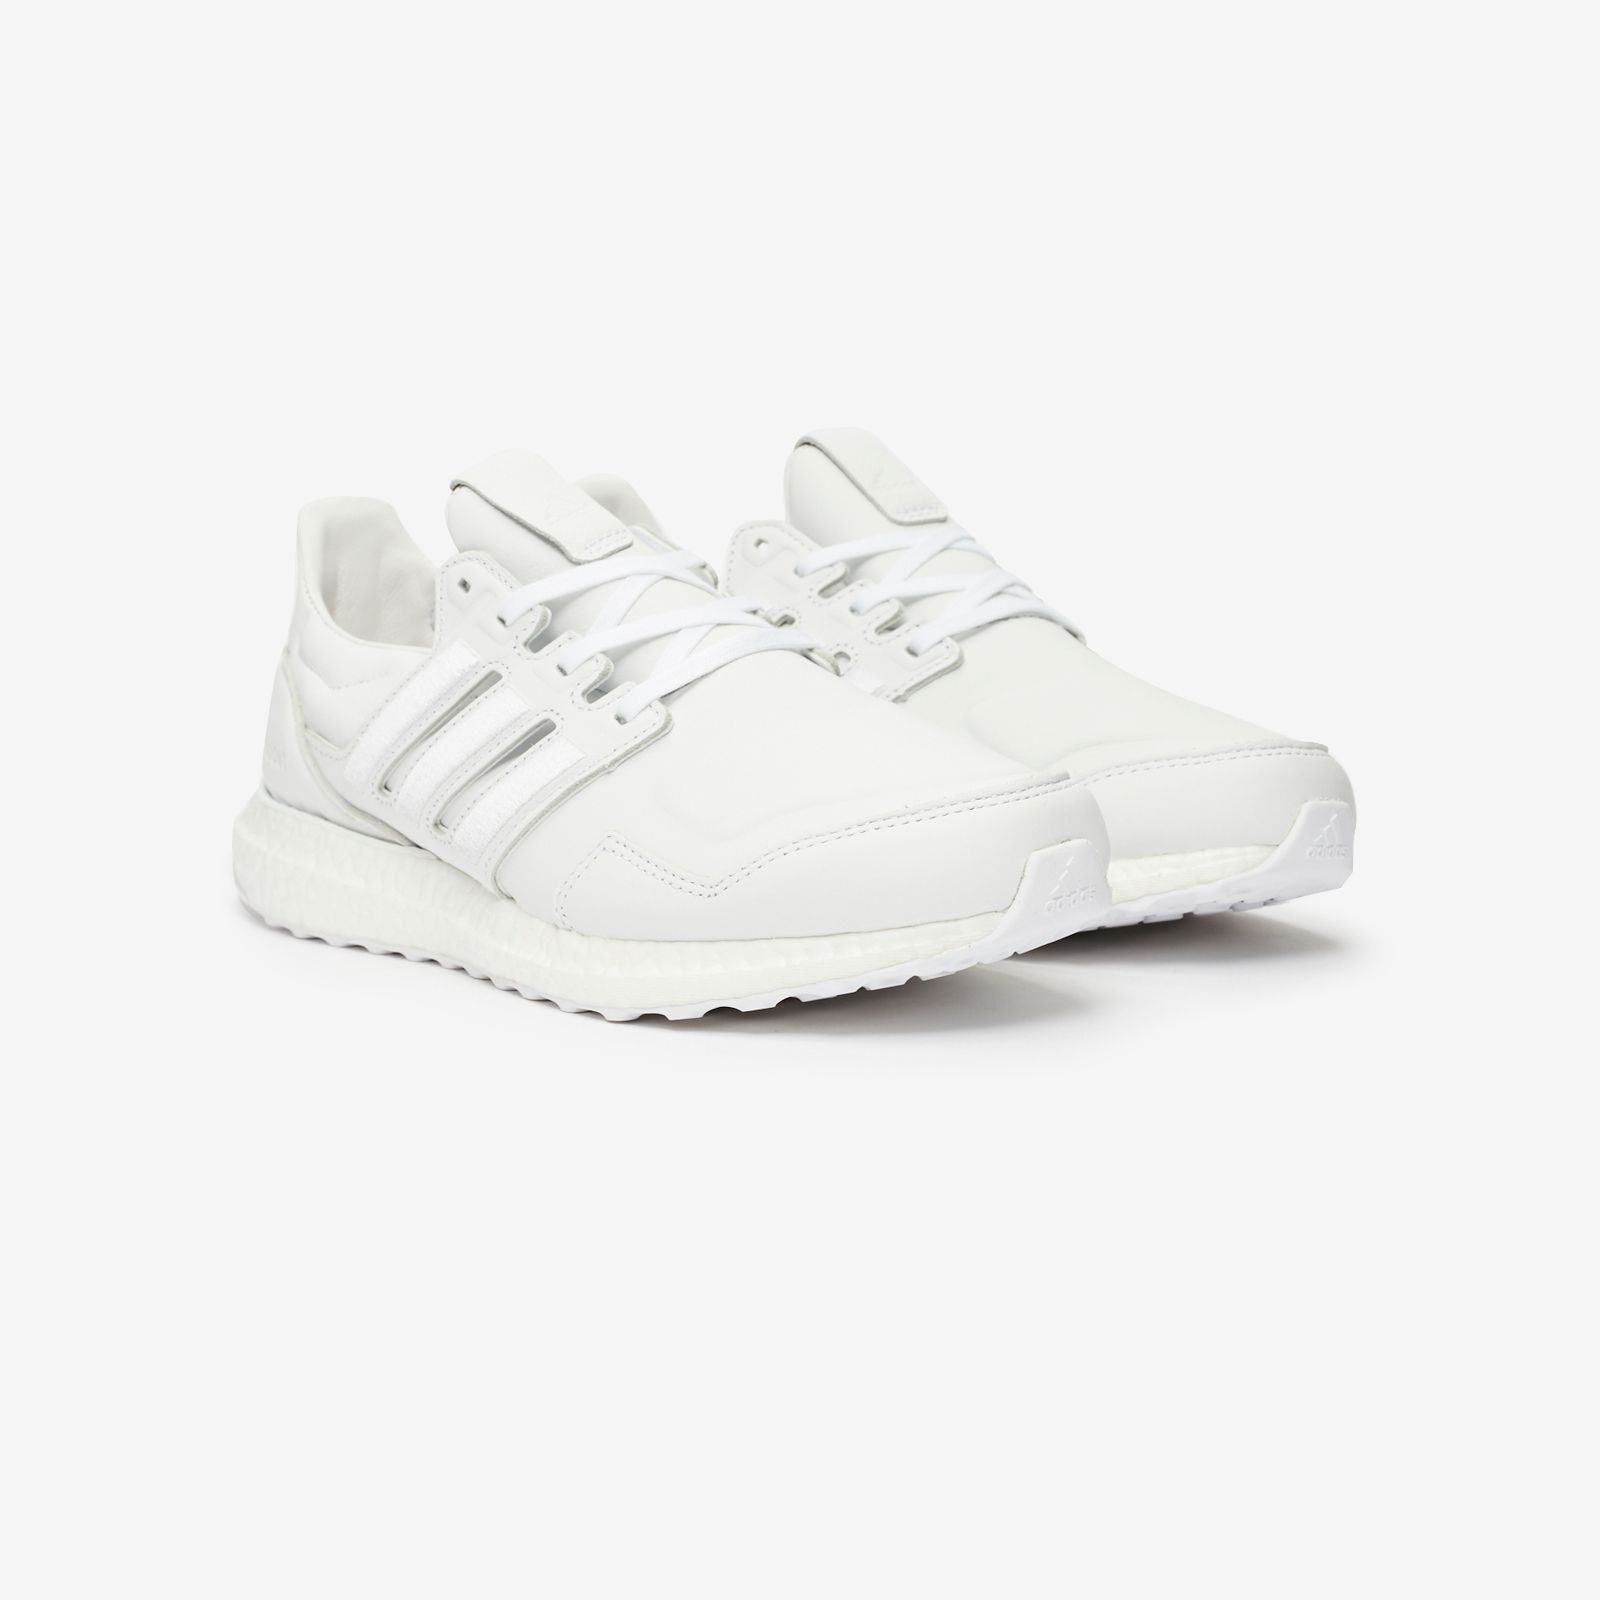 adidas leather tennis shoes